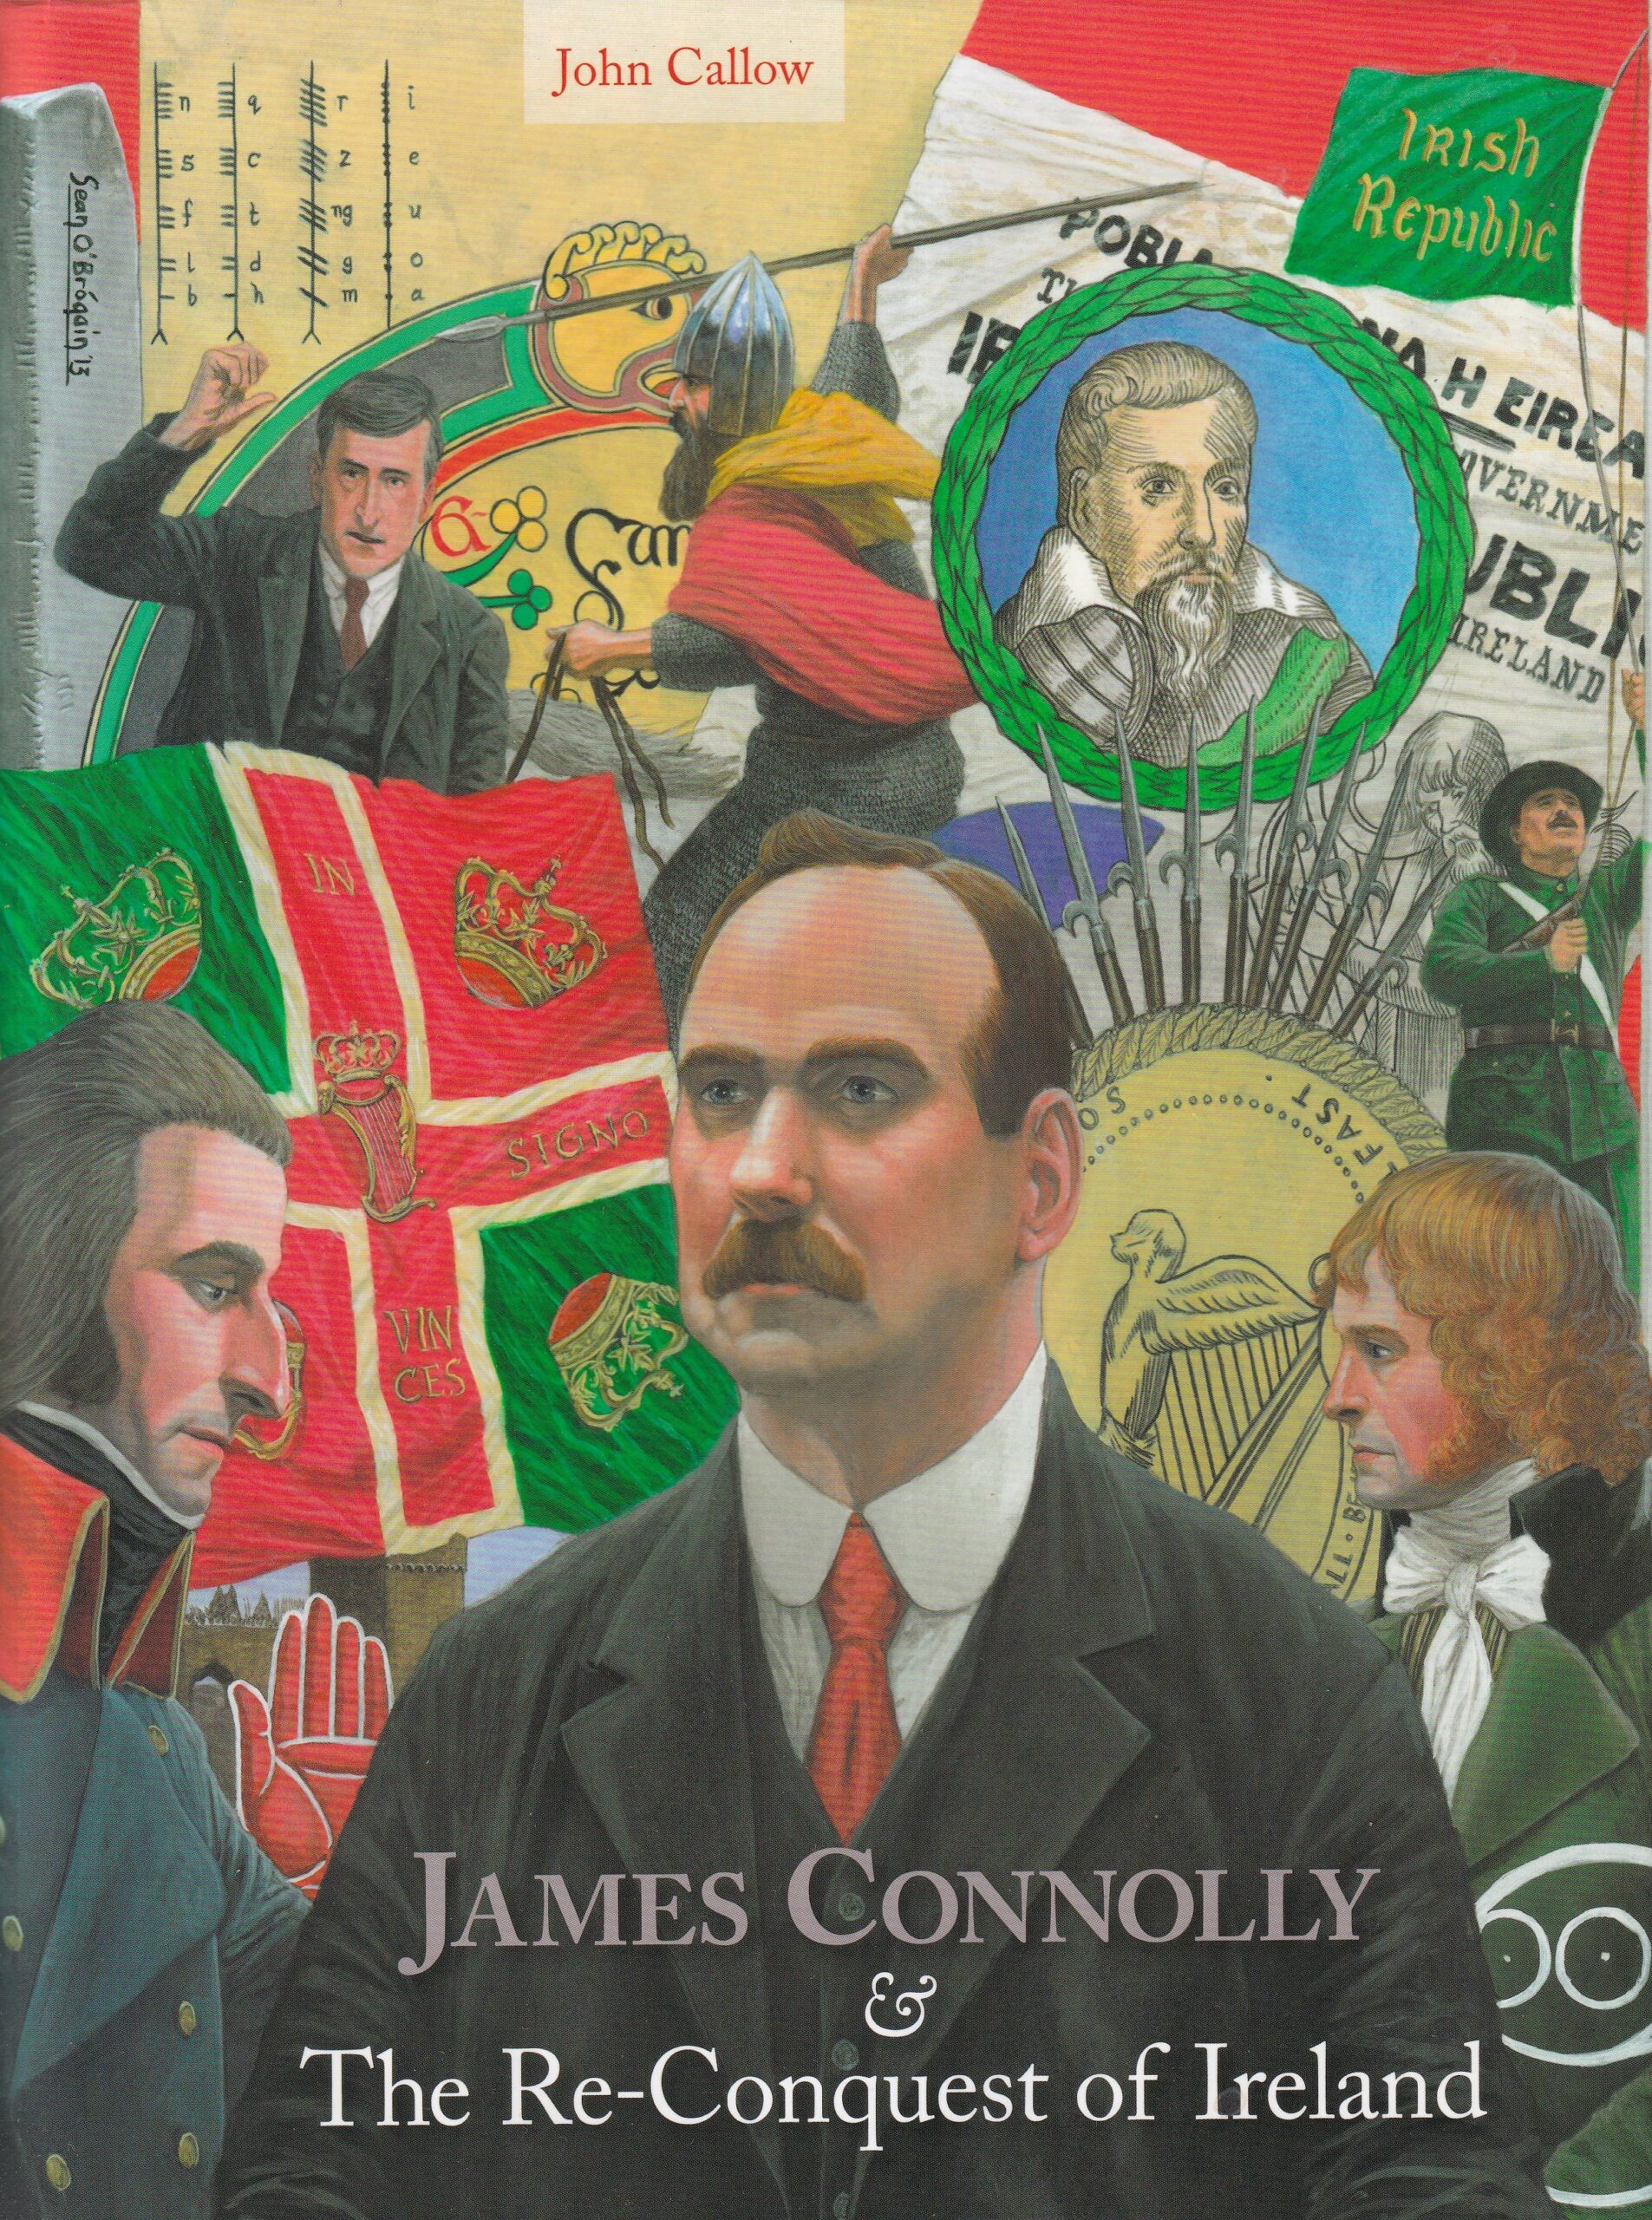 James Connolly and the Re-Conquest of Ireland | John Callow | Charlie Byrne's